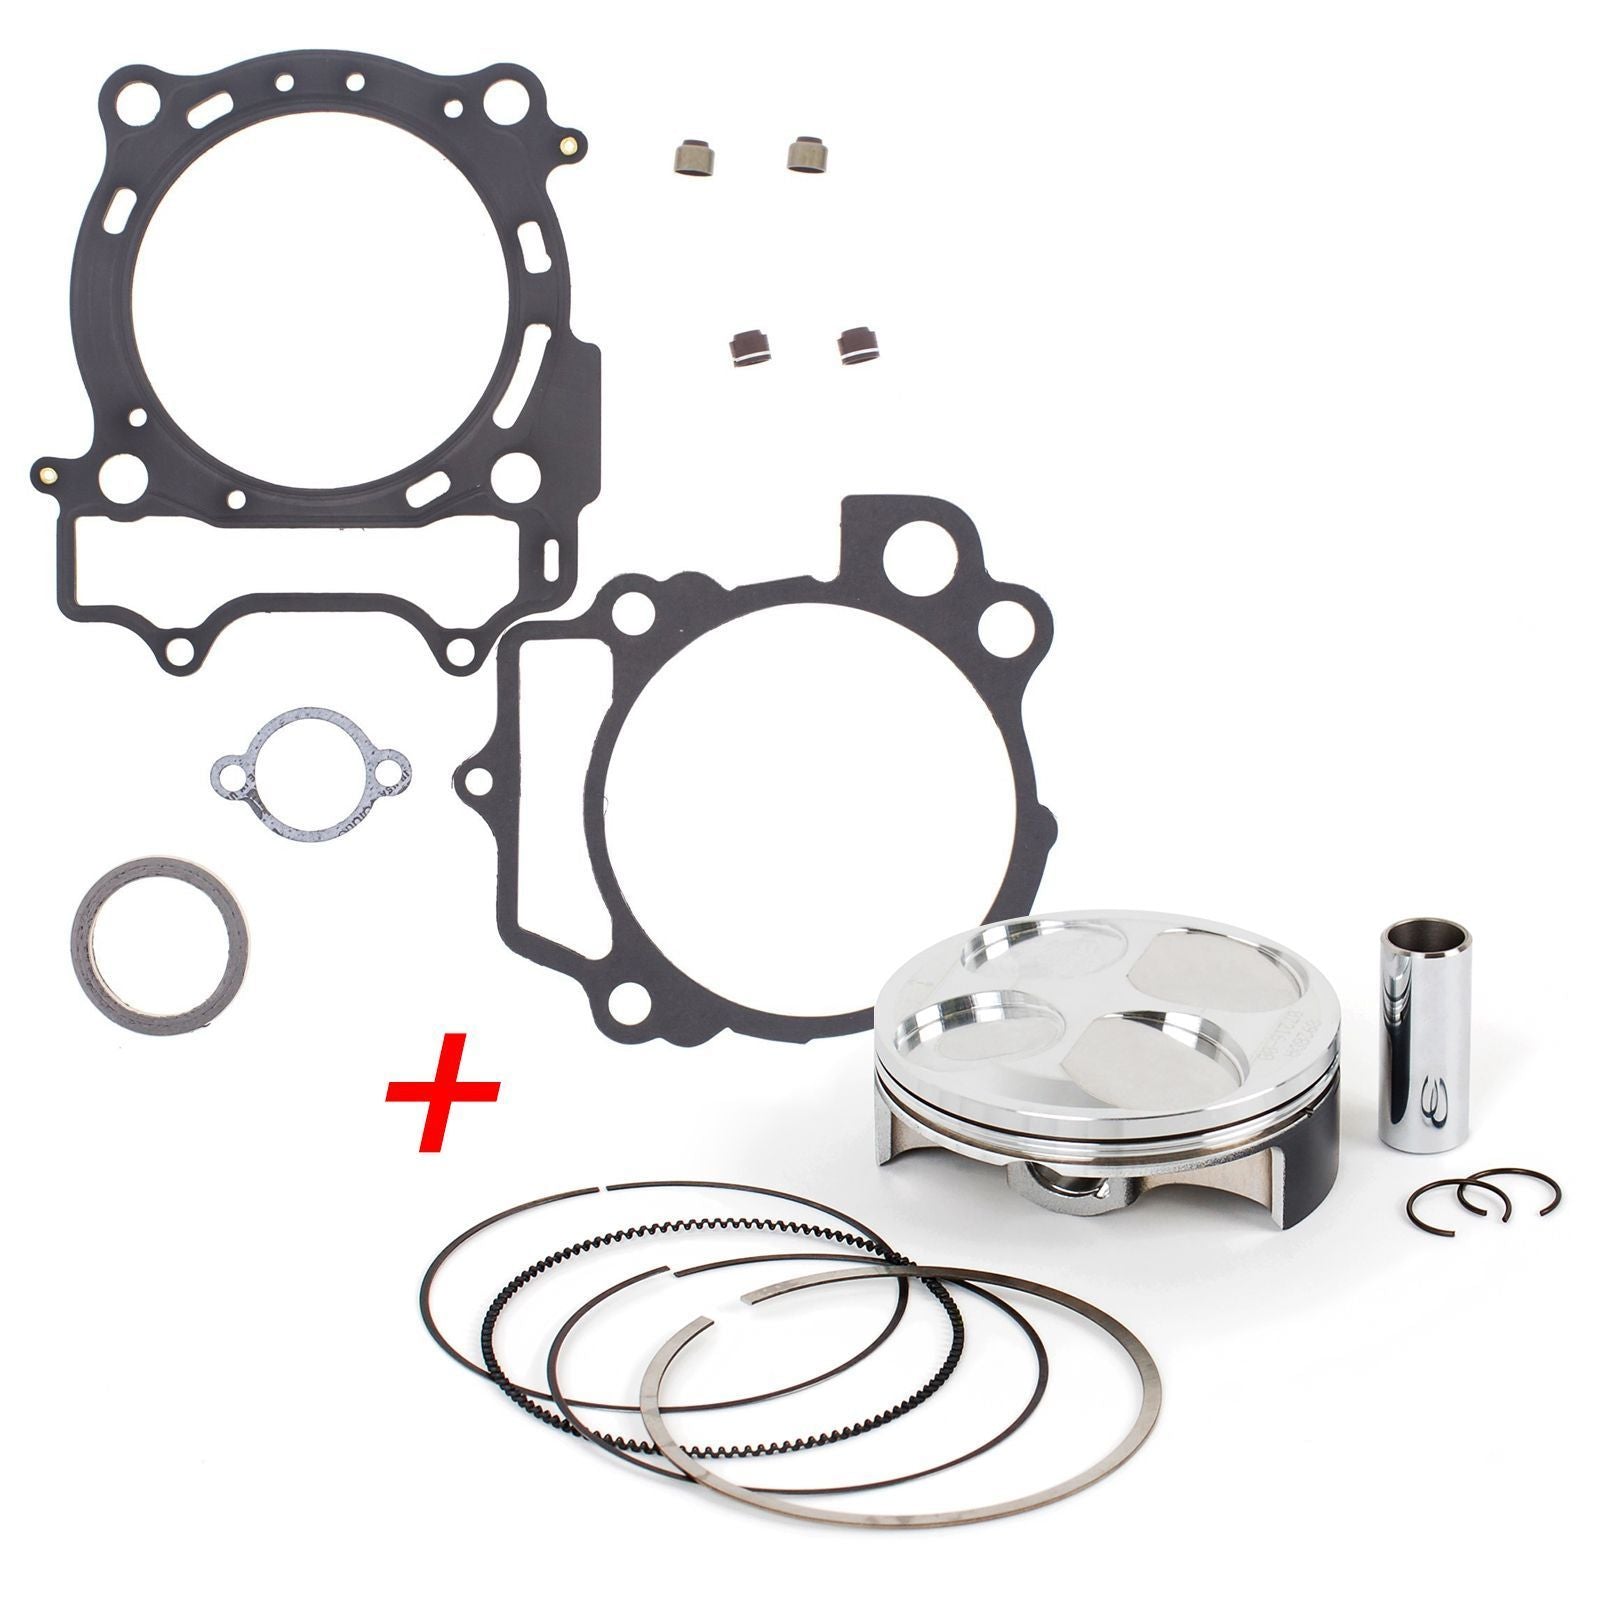 New Top End Rebuild Kit (A PRO) For Yamaha WR250F 2001-2013 #ERTY030AP